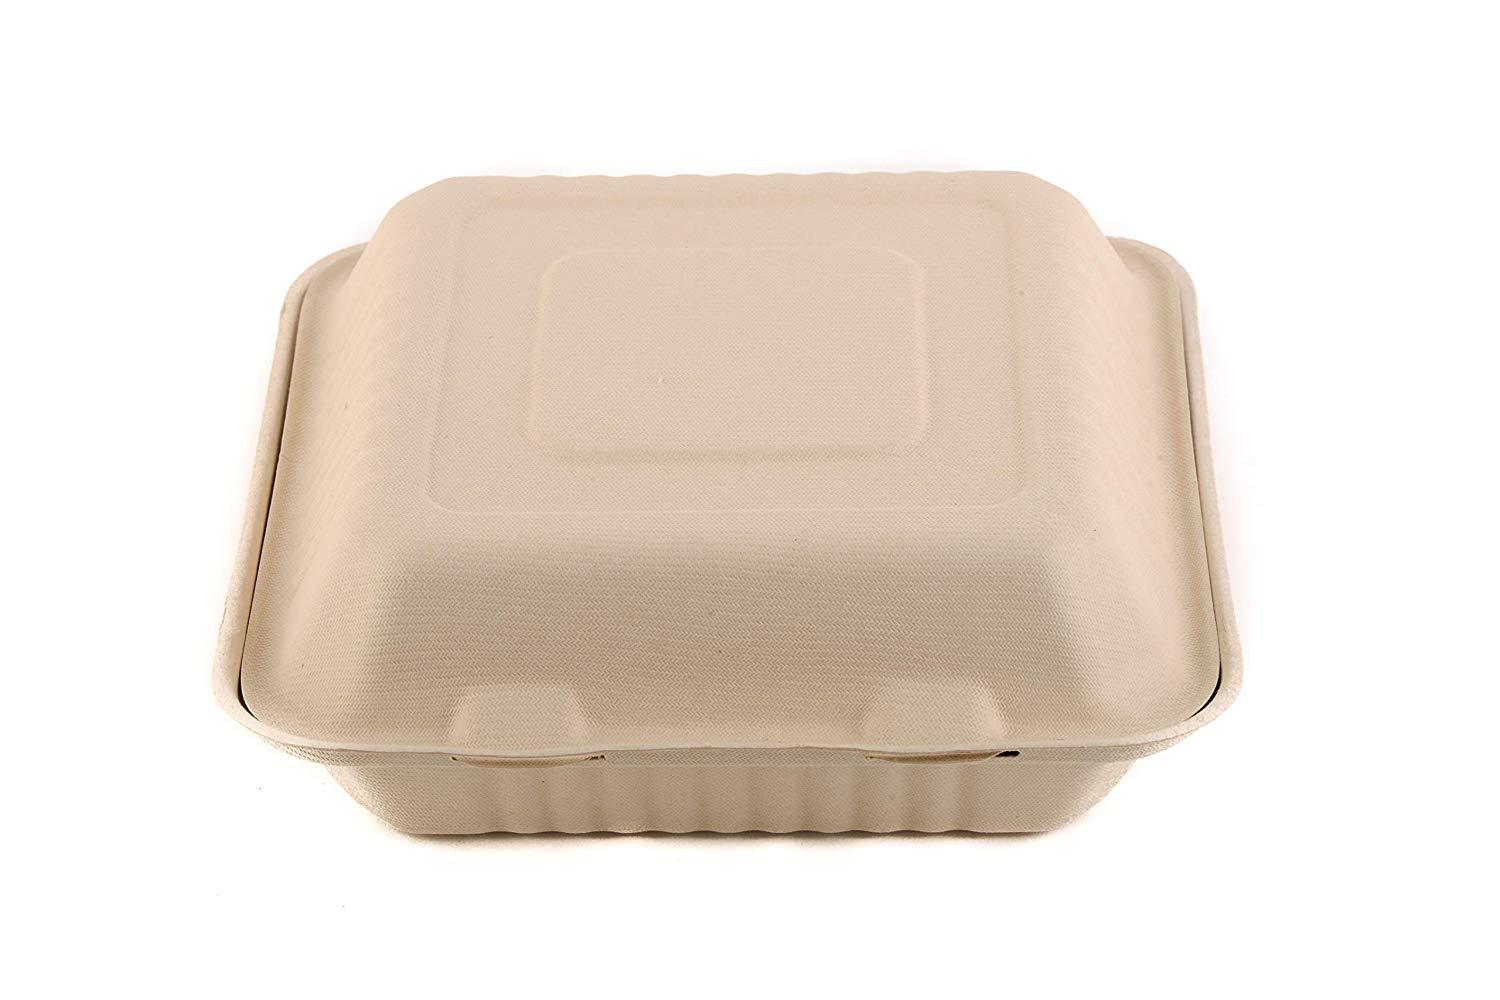 8x8 Eco-Friendly 3 Compartment  Hinged Clamshell Heavy-Duty Disposable Containers